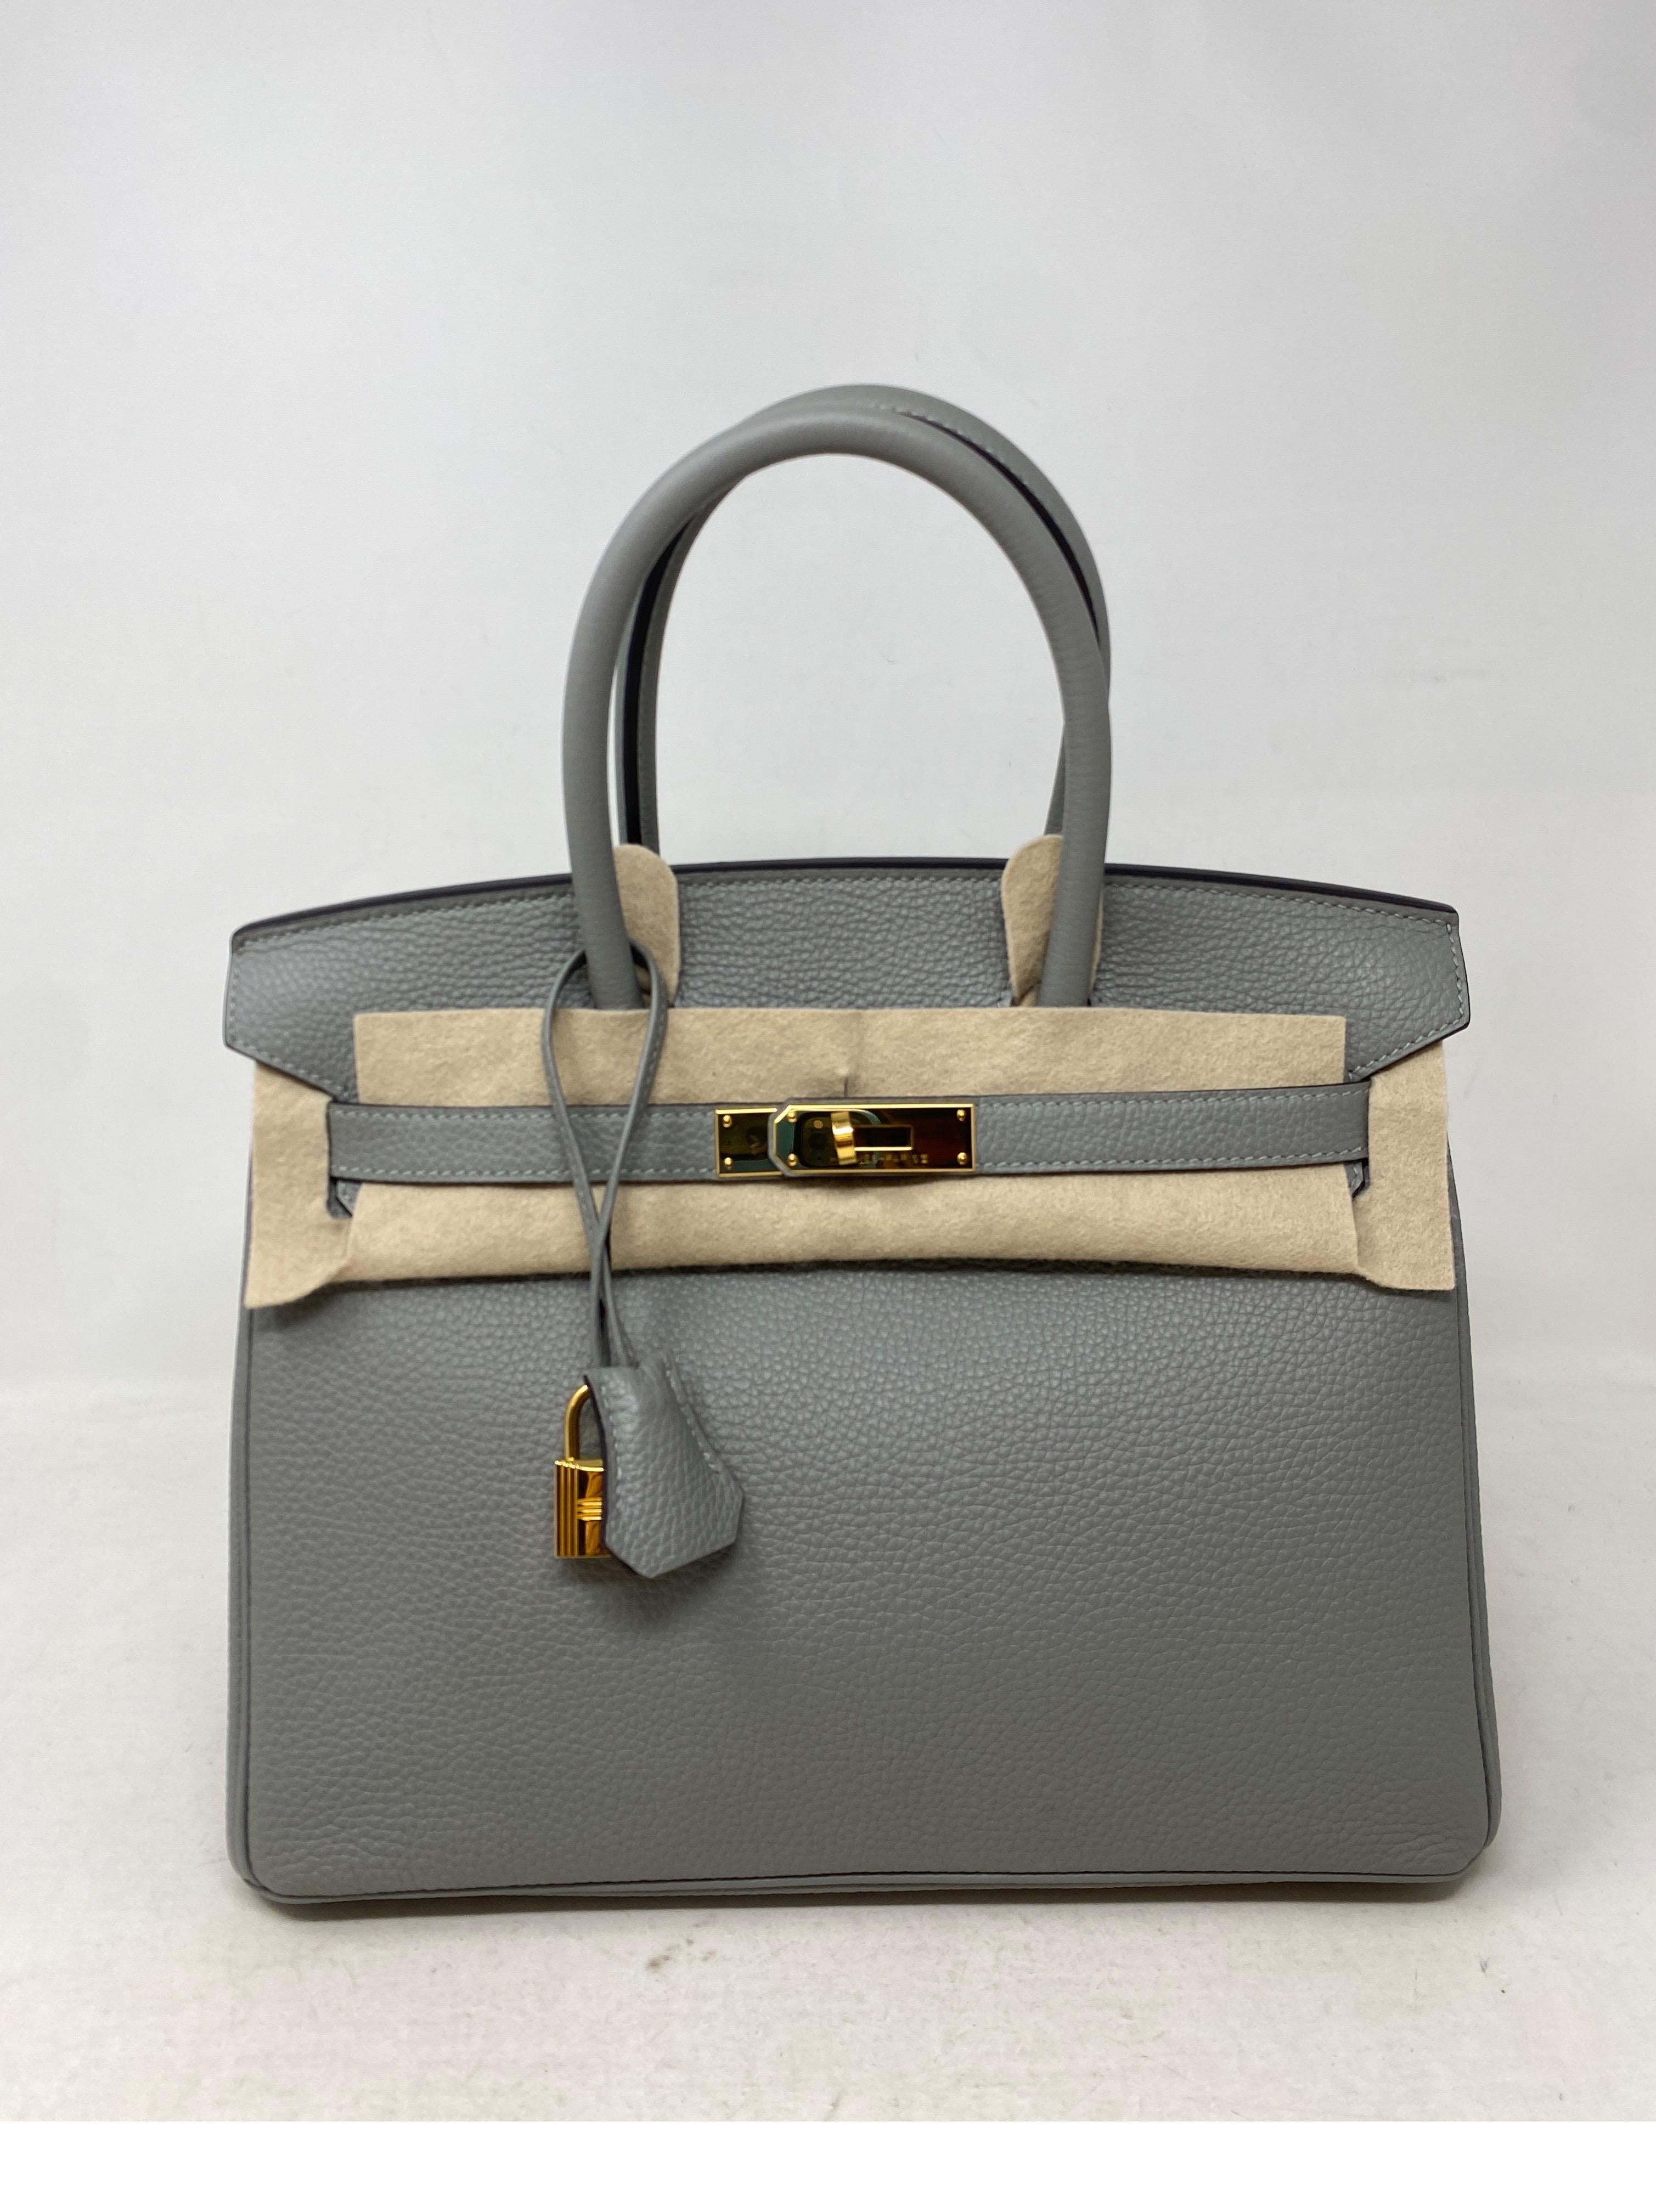 Hermes Gris Mouette Birkin 30 Bag. Light bluish gray leather with gold hardware. Rare color and in excellent condition. Looks like new. Kept in dust bag. Stunning color. Gift worthy. Includes clochette, lock, keys, and dust bag. Guaranteed